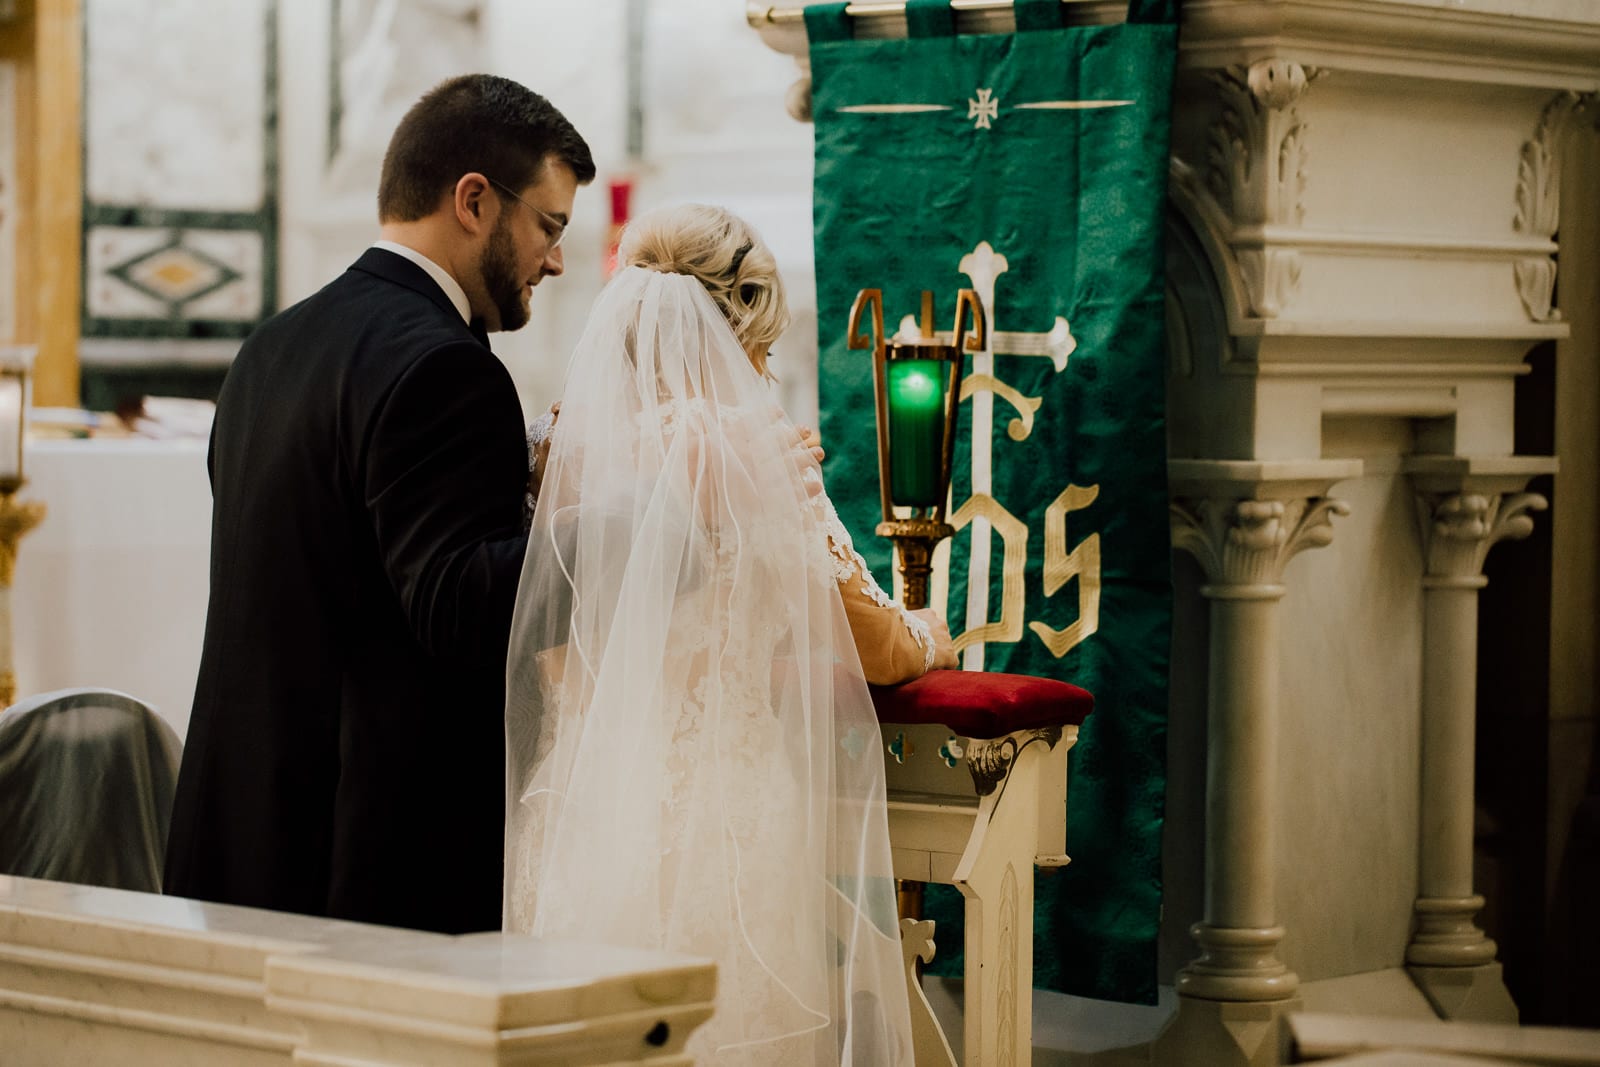 Bride and groom pray to mary